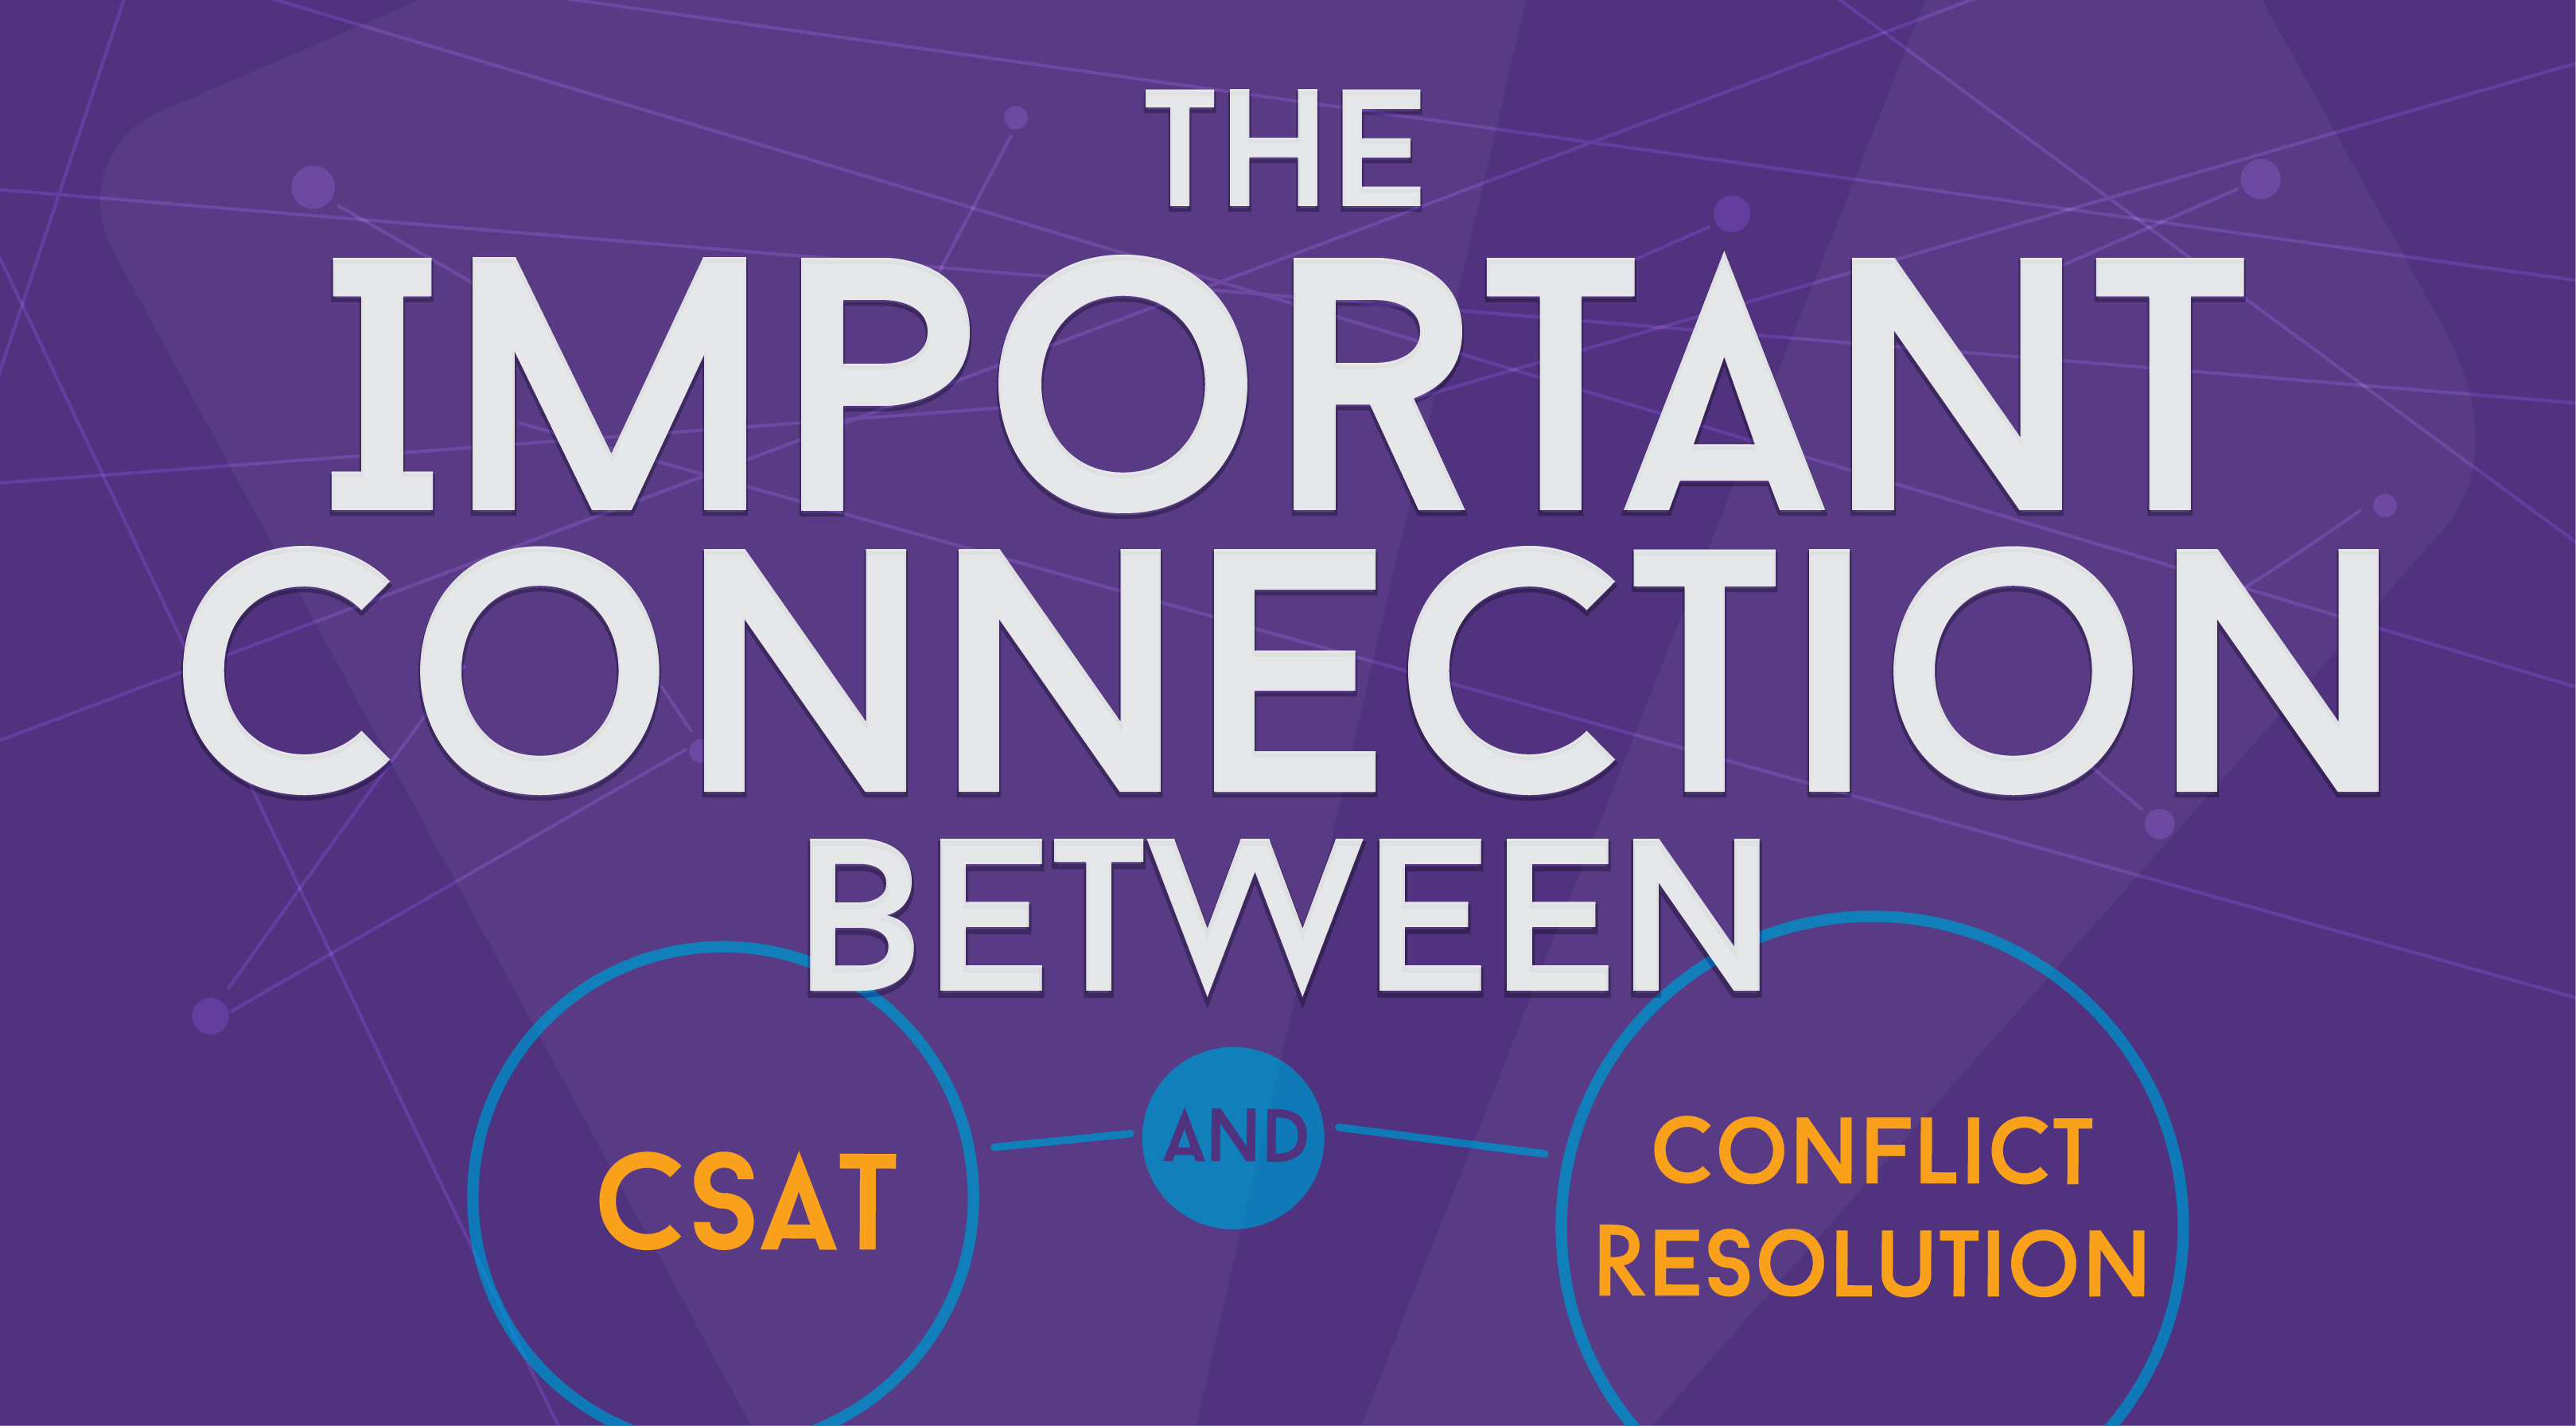 csat and conflict resolution